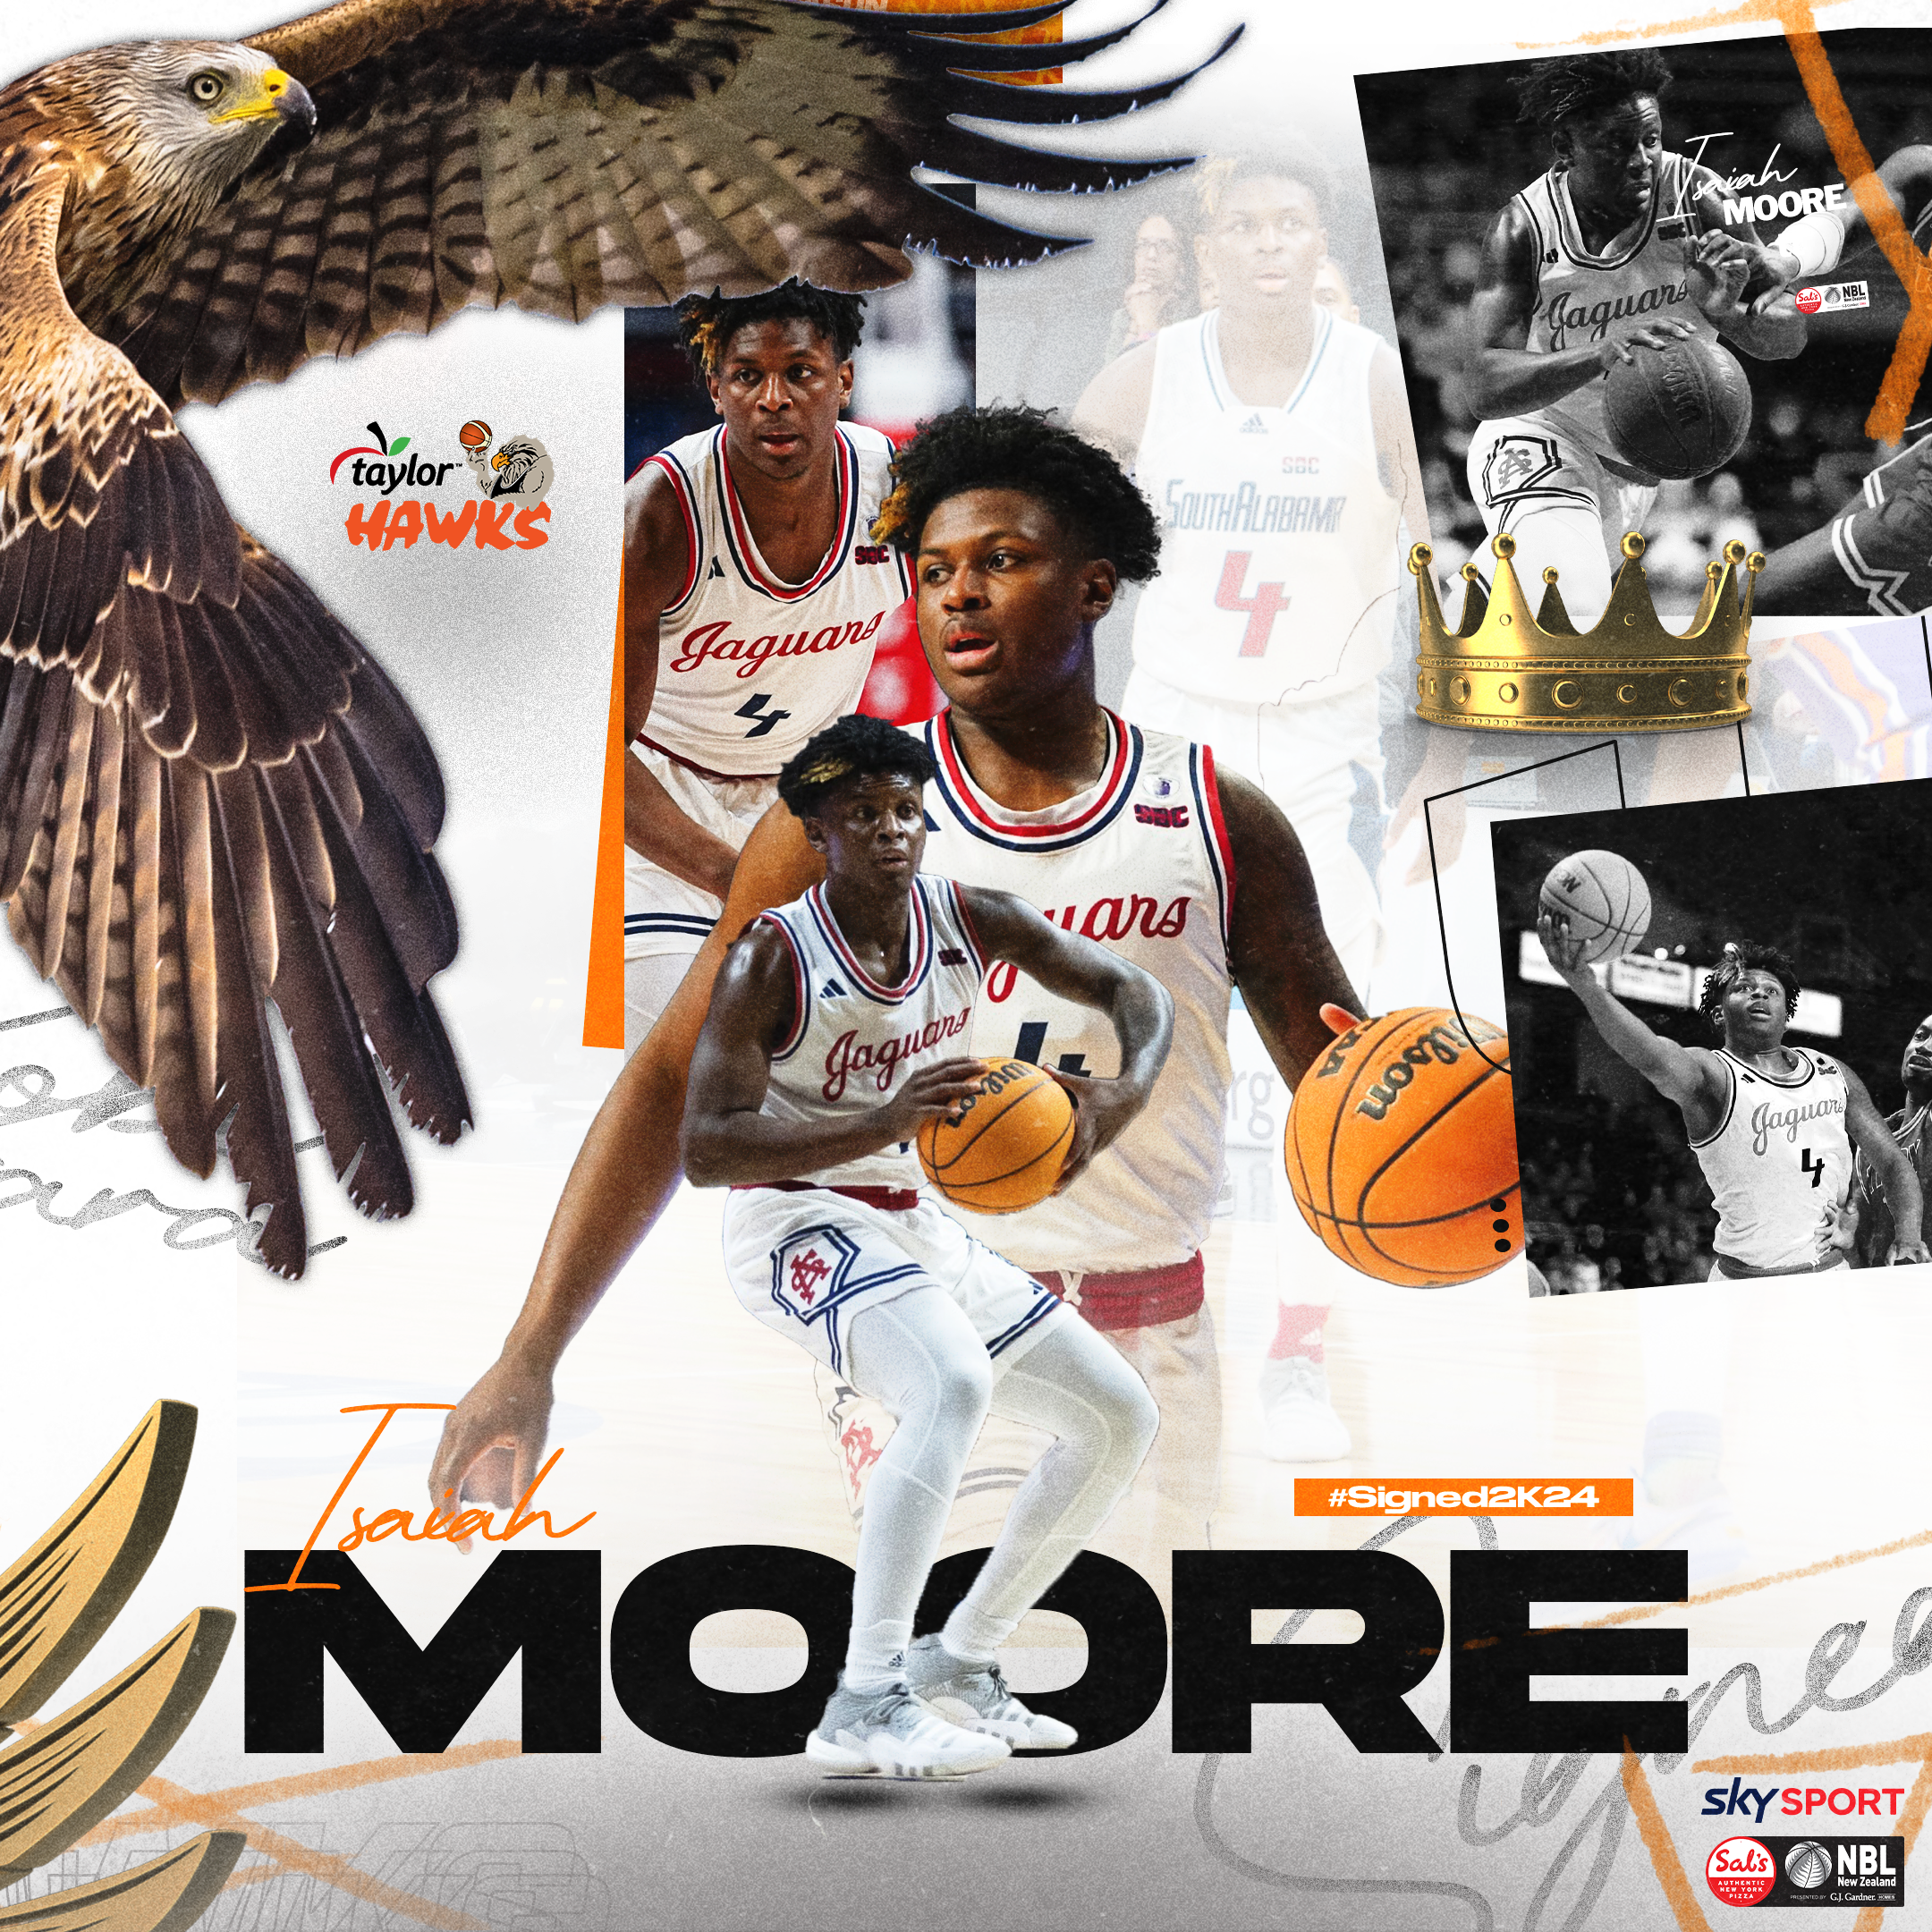 Moore poise and direction for the Hawks